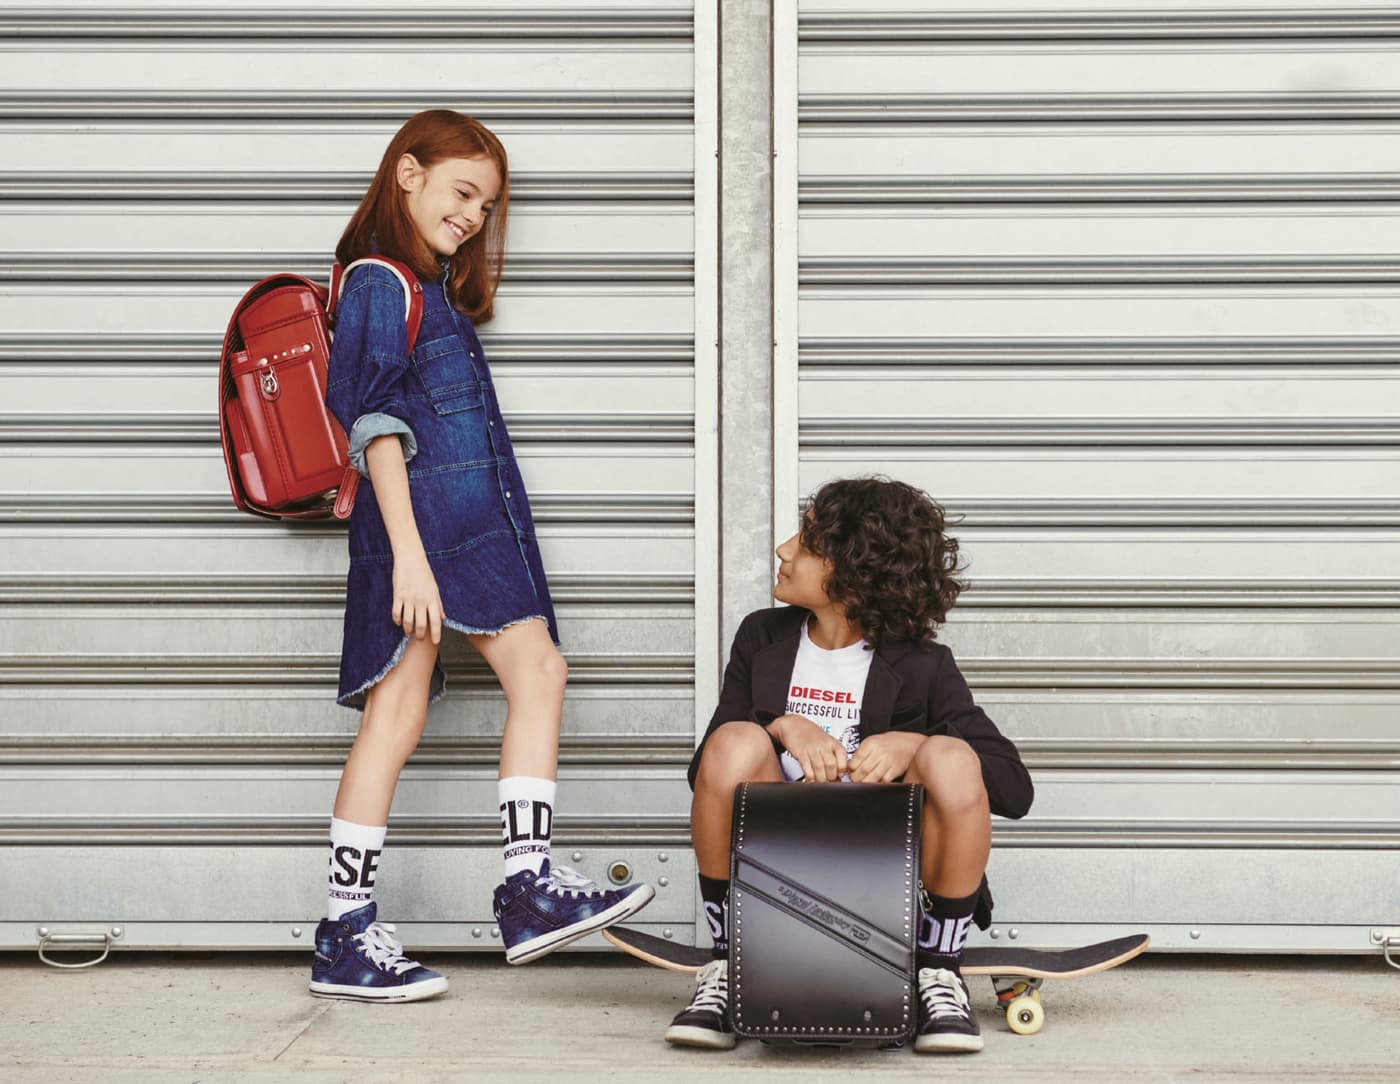 Diesel for Randoseru backpacks’ collection.
Randoseru represents for Japanese children the start of a new phase in life upon beginning their first year of school.
Riccardo Polcaro, fotografo moda bambino.